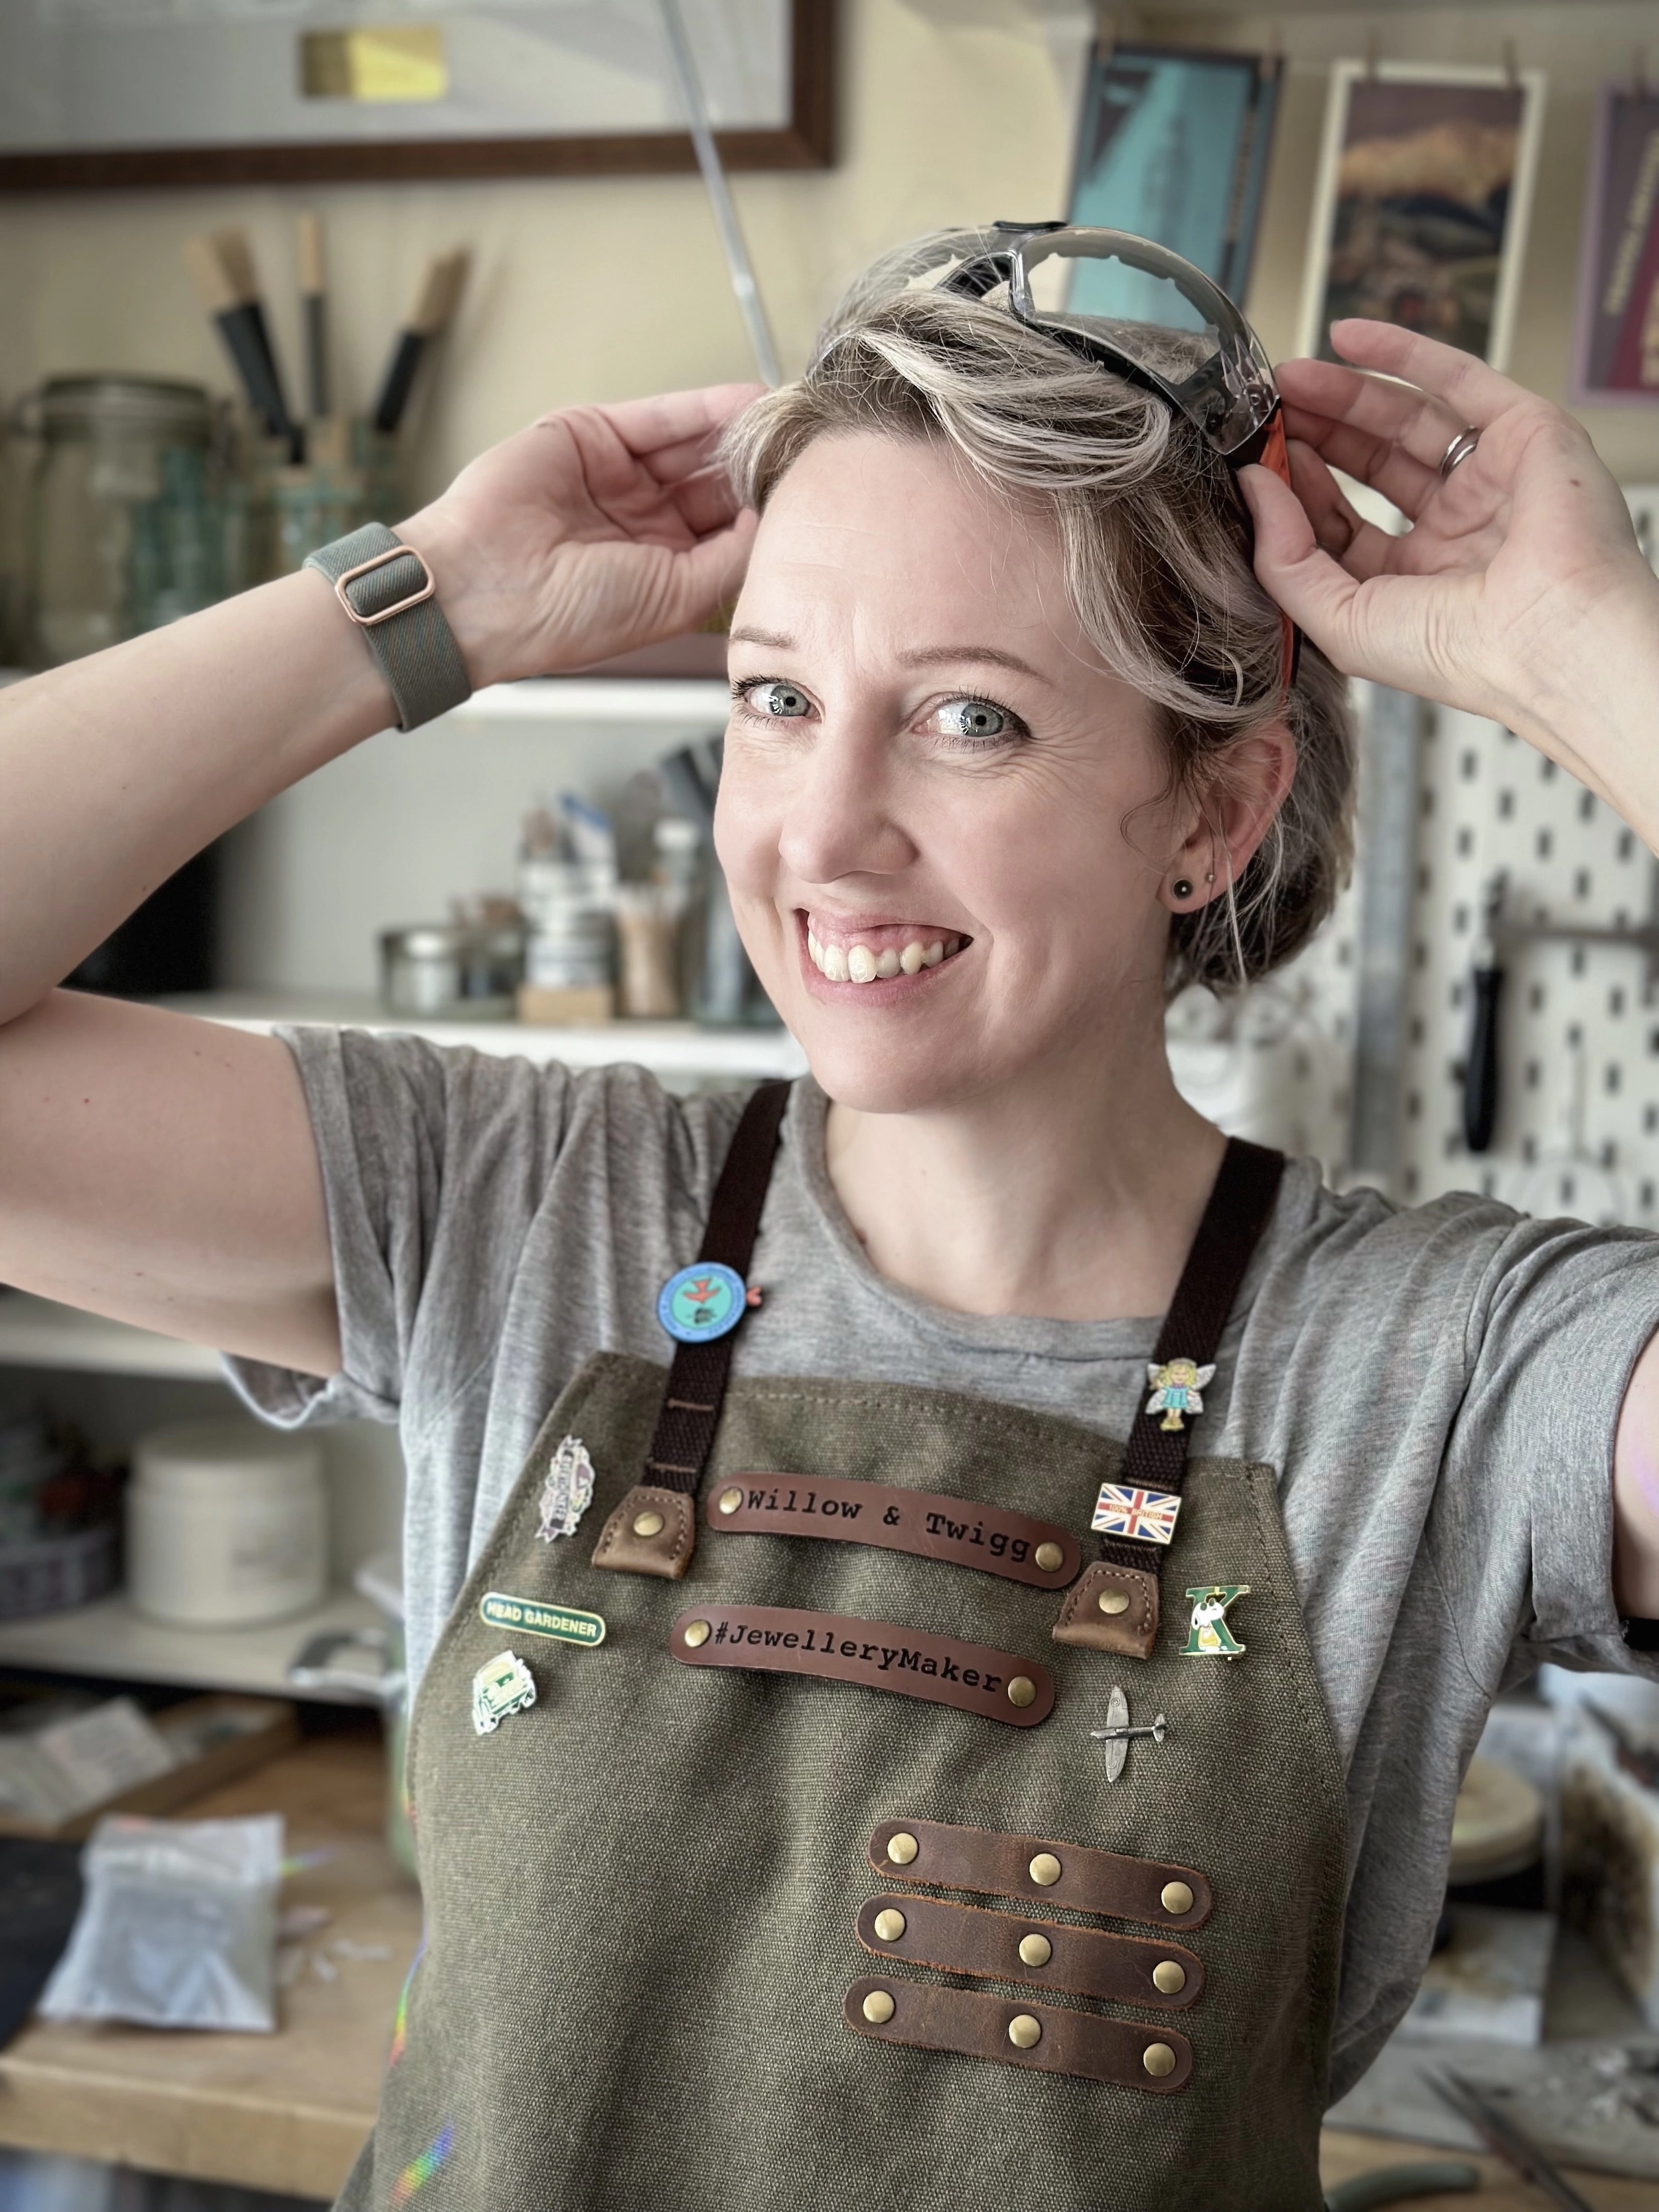 Kelly from Willow And Twigg, standing in her jewellery studio wearing a green canvas apron and placing a pair of safety goggles on her head.